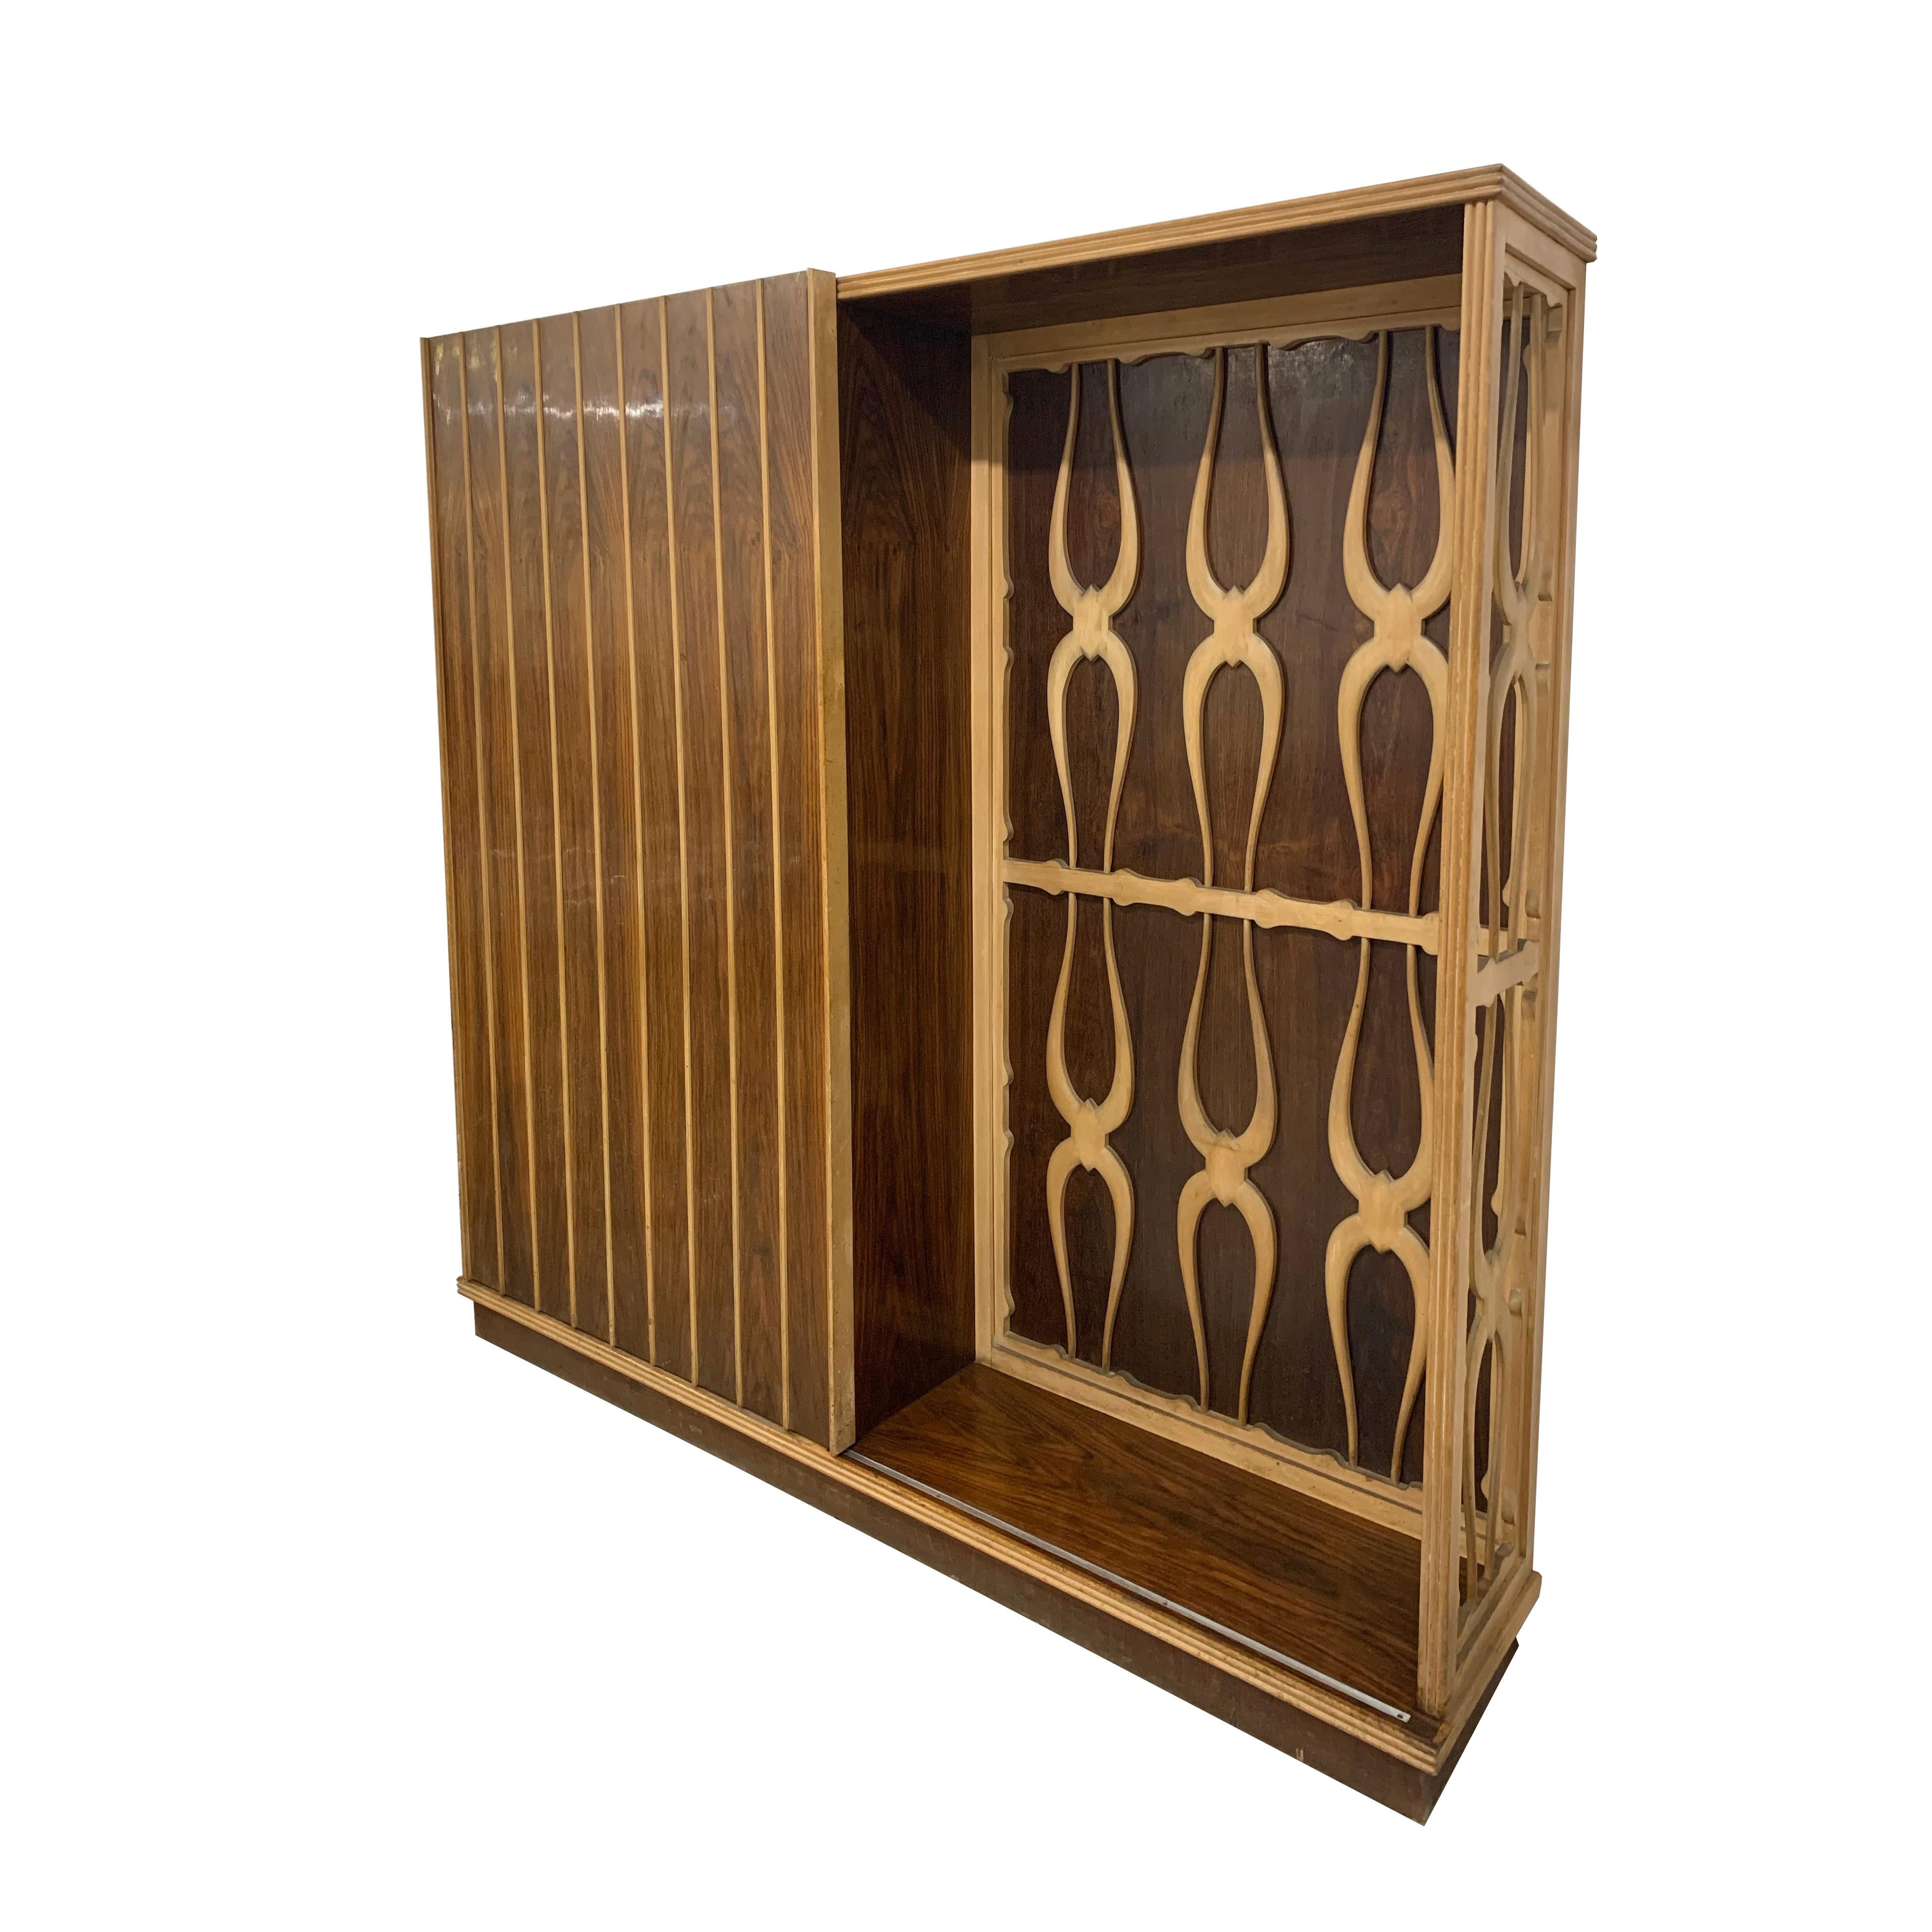 Amazing Italian wardrobe from the 1950s with sliding door. This hat rack was produced in Italy during 1950s.

This marvellous piece is in maple wood and was produced by Consorzio Esposizione Mobili Cantù. In the inside, it has three brass and